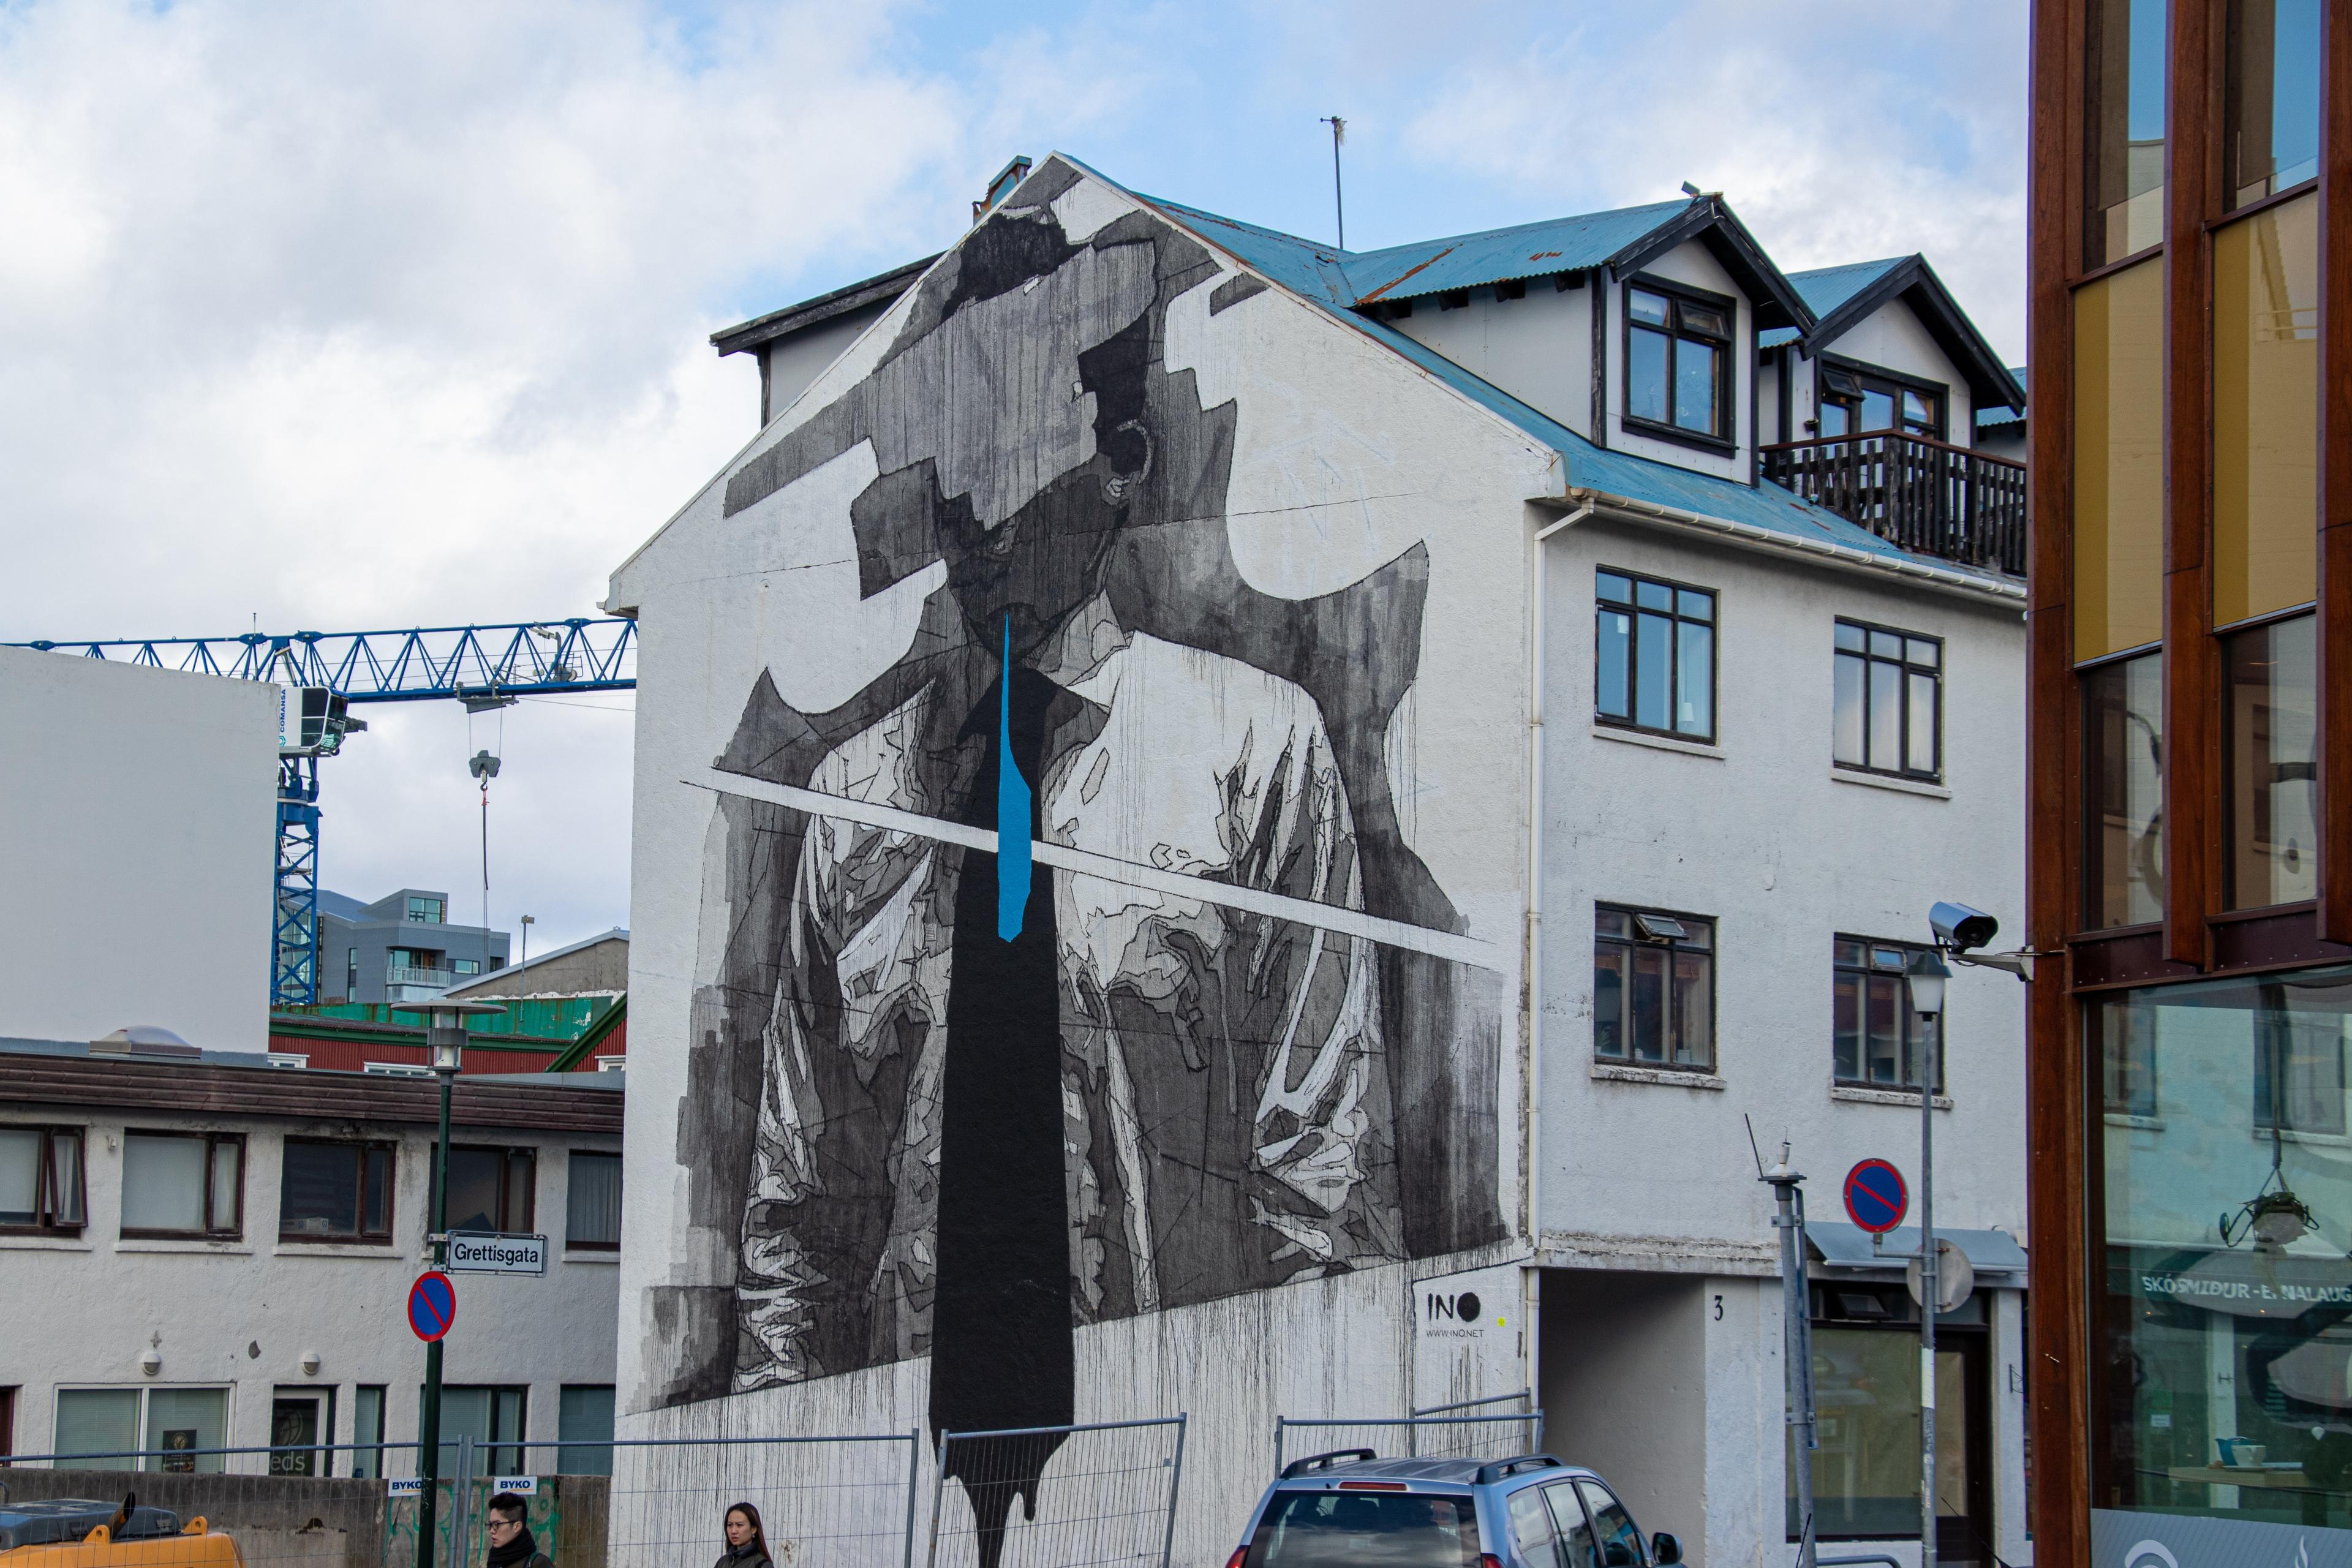 A house in Reykjavík covered in graffiti art, depicting a faceless figure donning a tie.